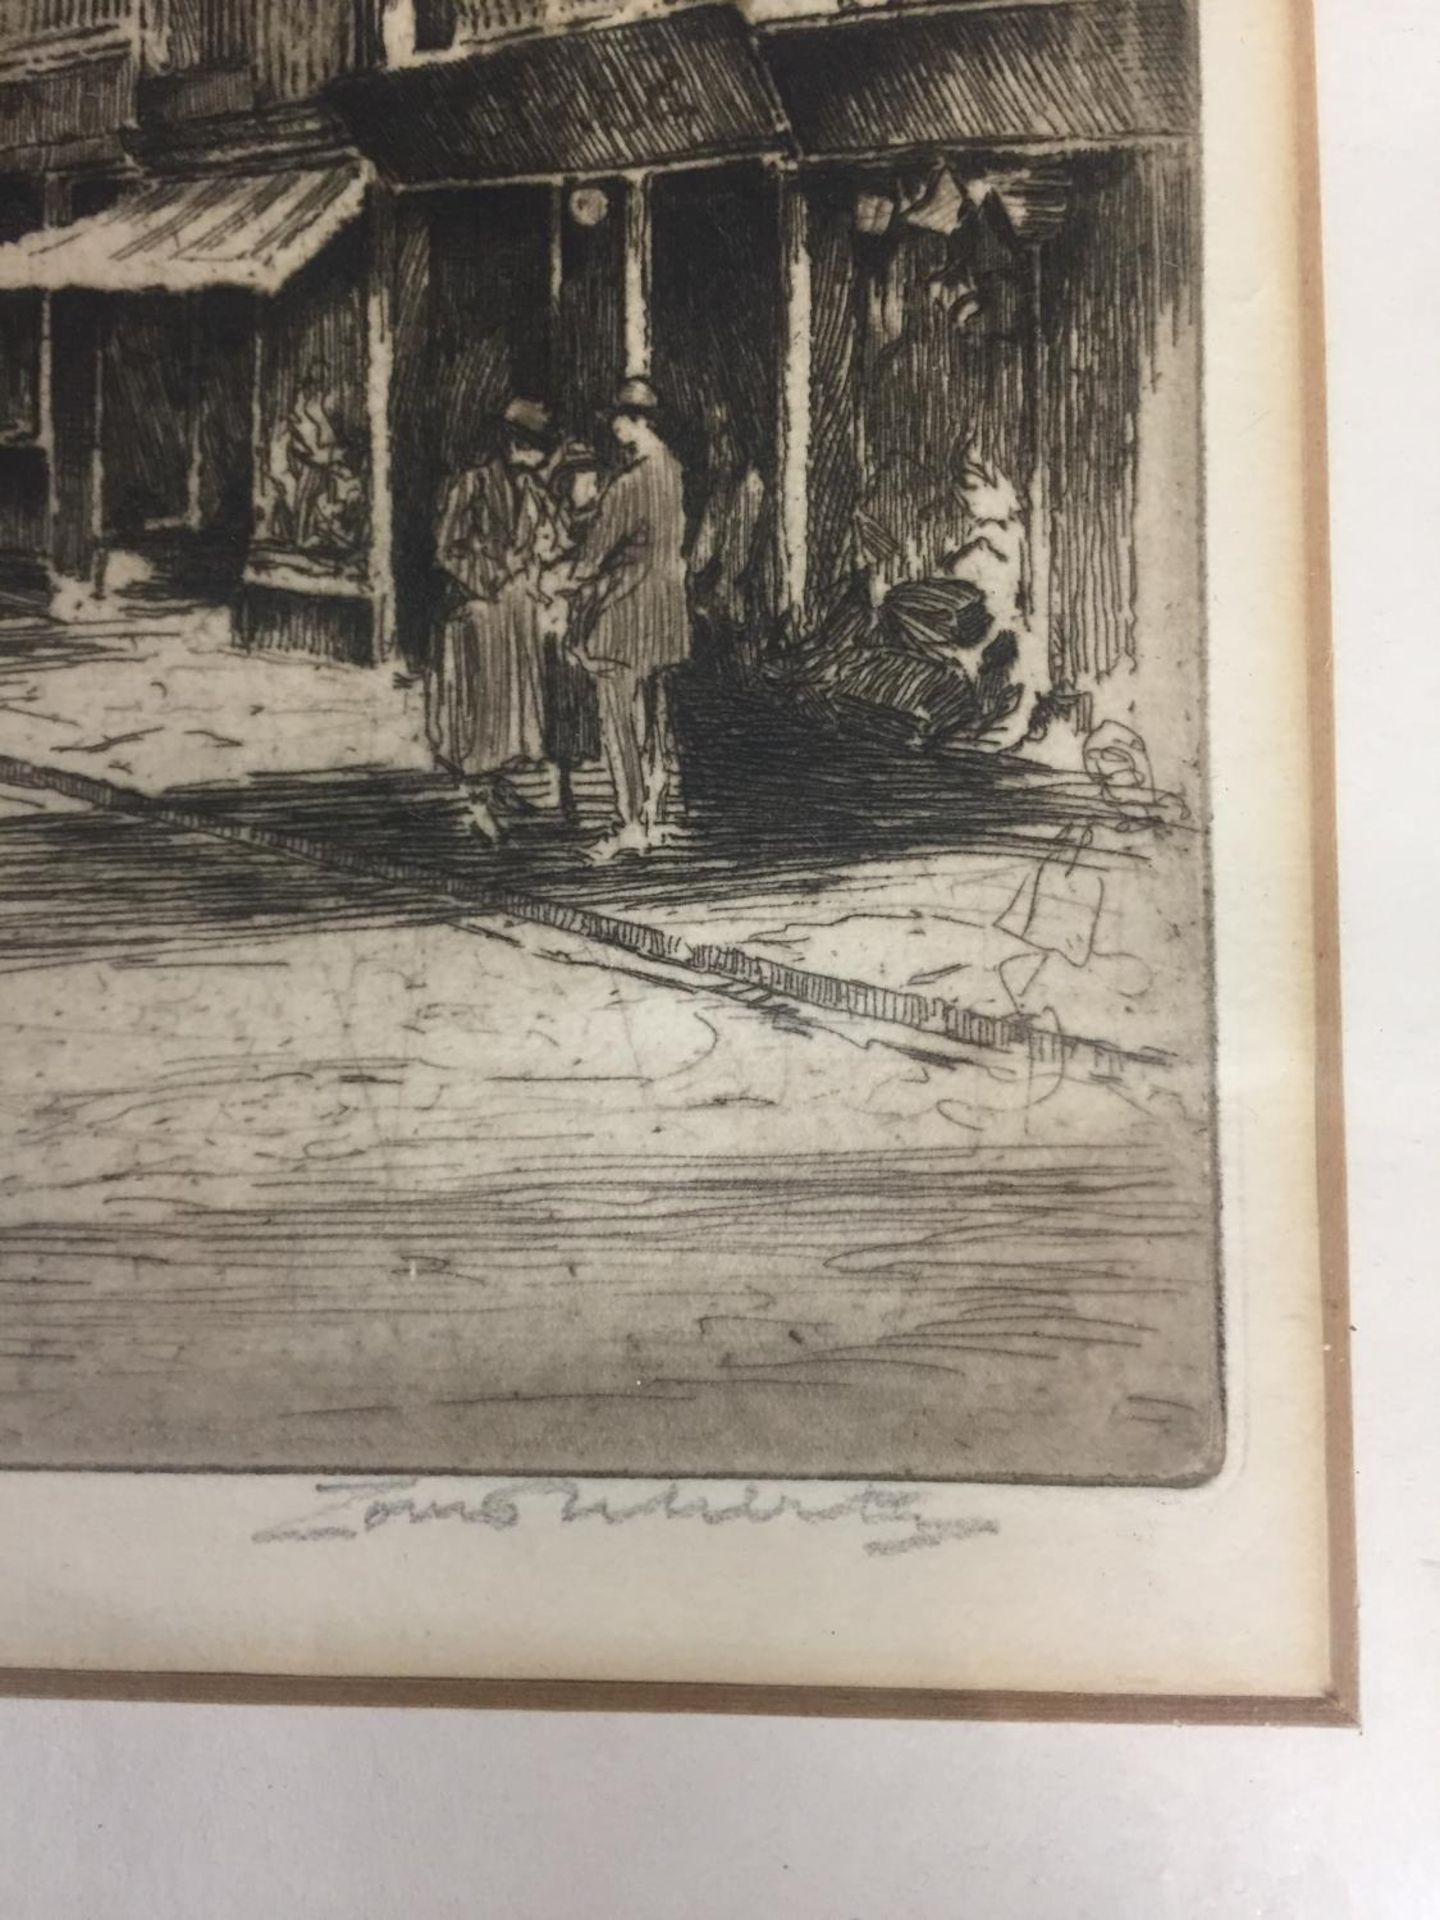 A FRAMED PRINT OF A VINTAGE STREET SCENE, SIGNED IN PENCIL - Image 2 of 2